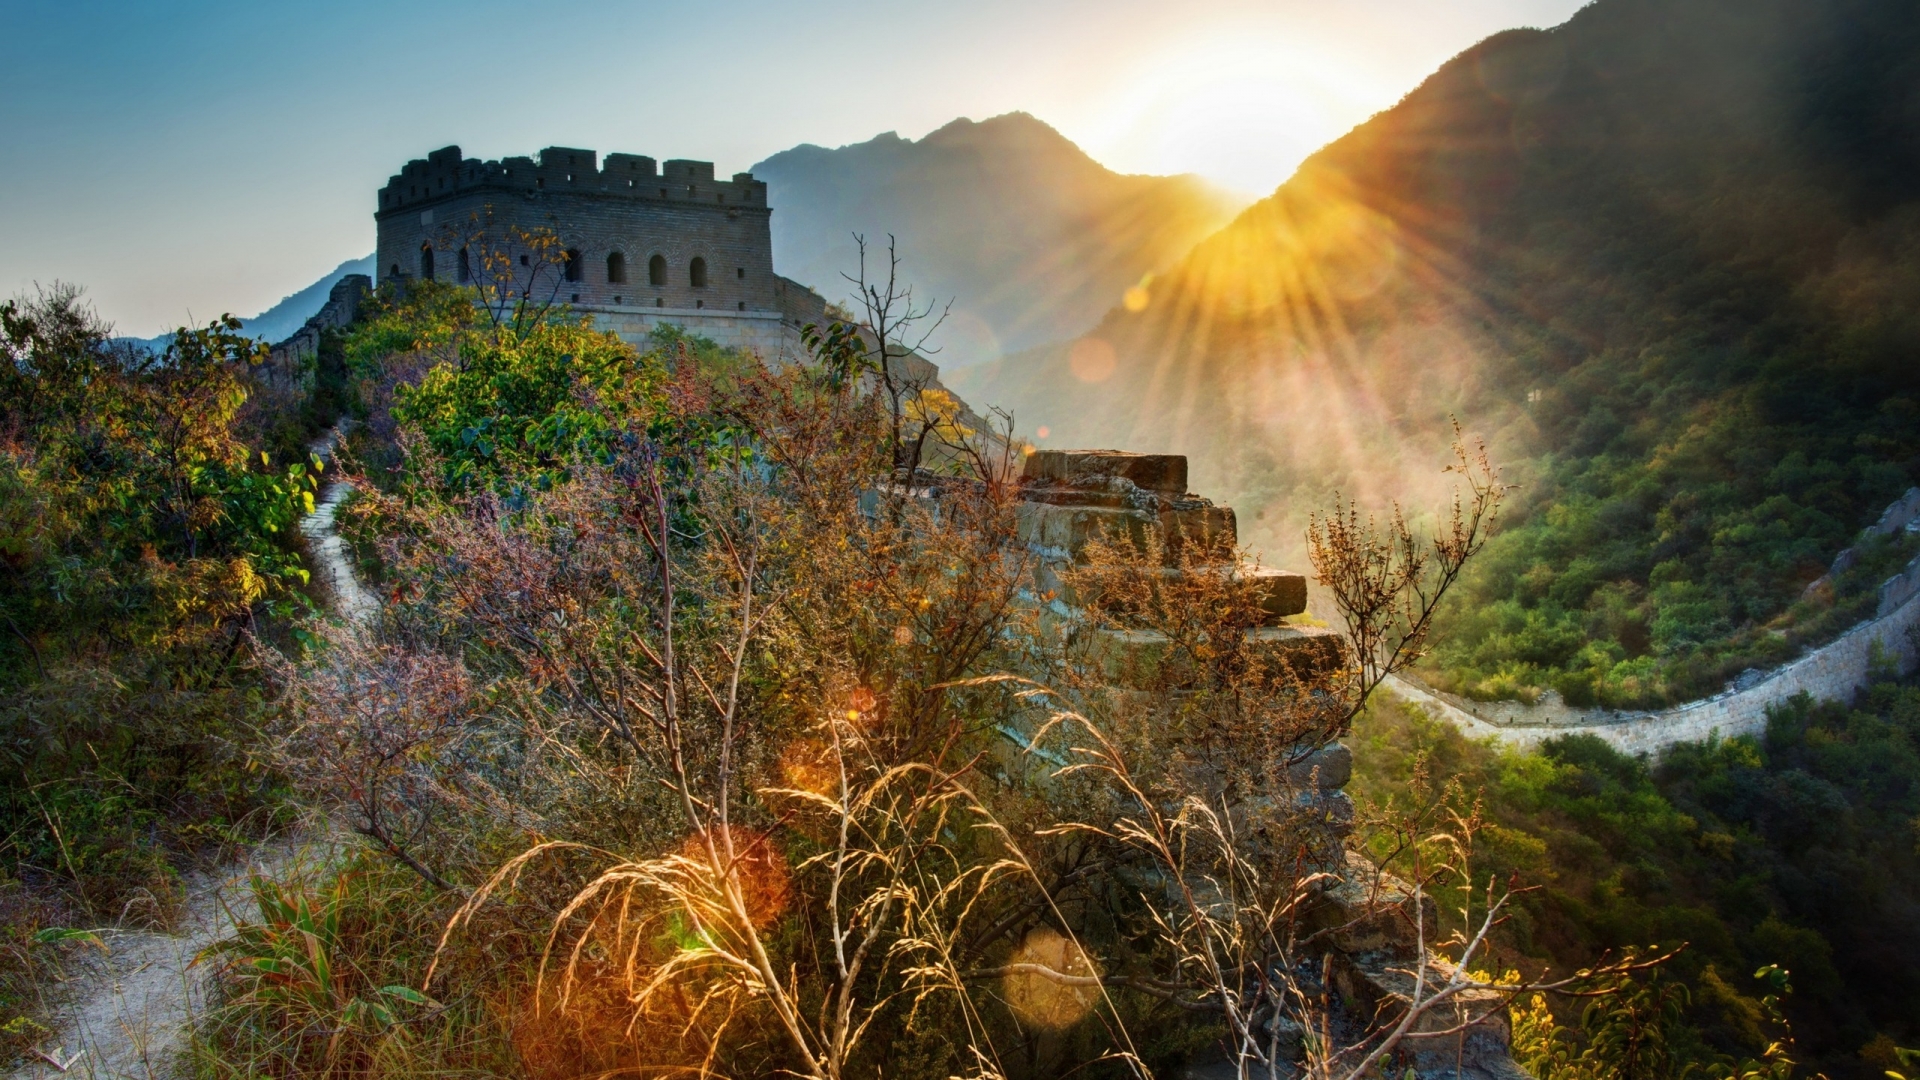 The Great Wall of China Landscape for 1920 x 1080 HDTV 1080p resolution